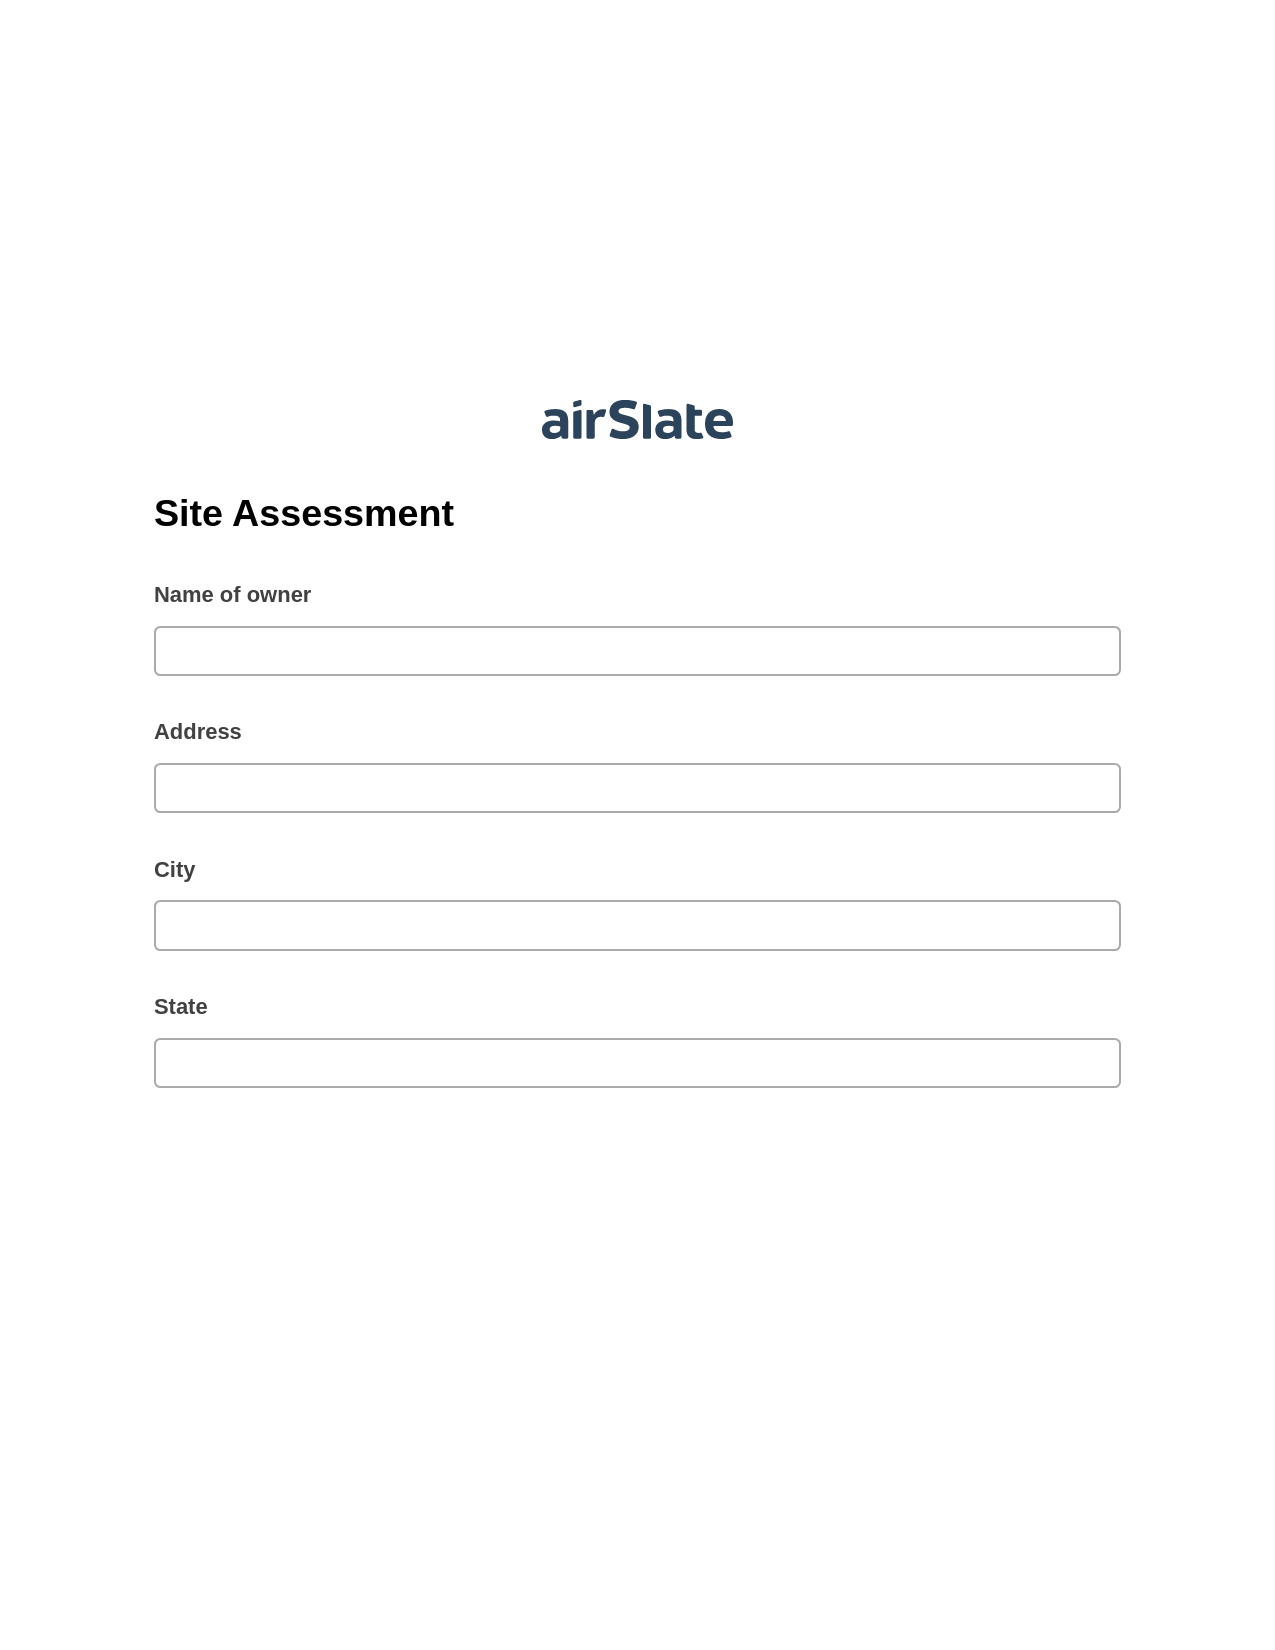 Site Assessment Pre-fill from CSV File Dropdown Options Bot, Audit Trail Bot, Box Bot